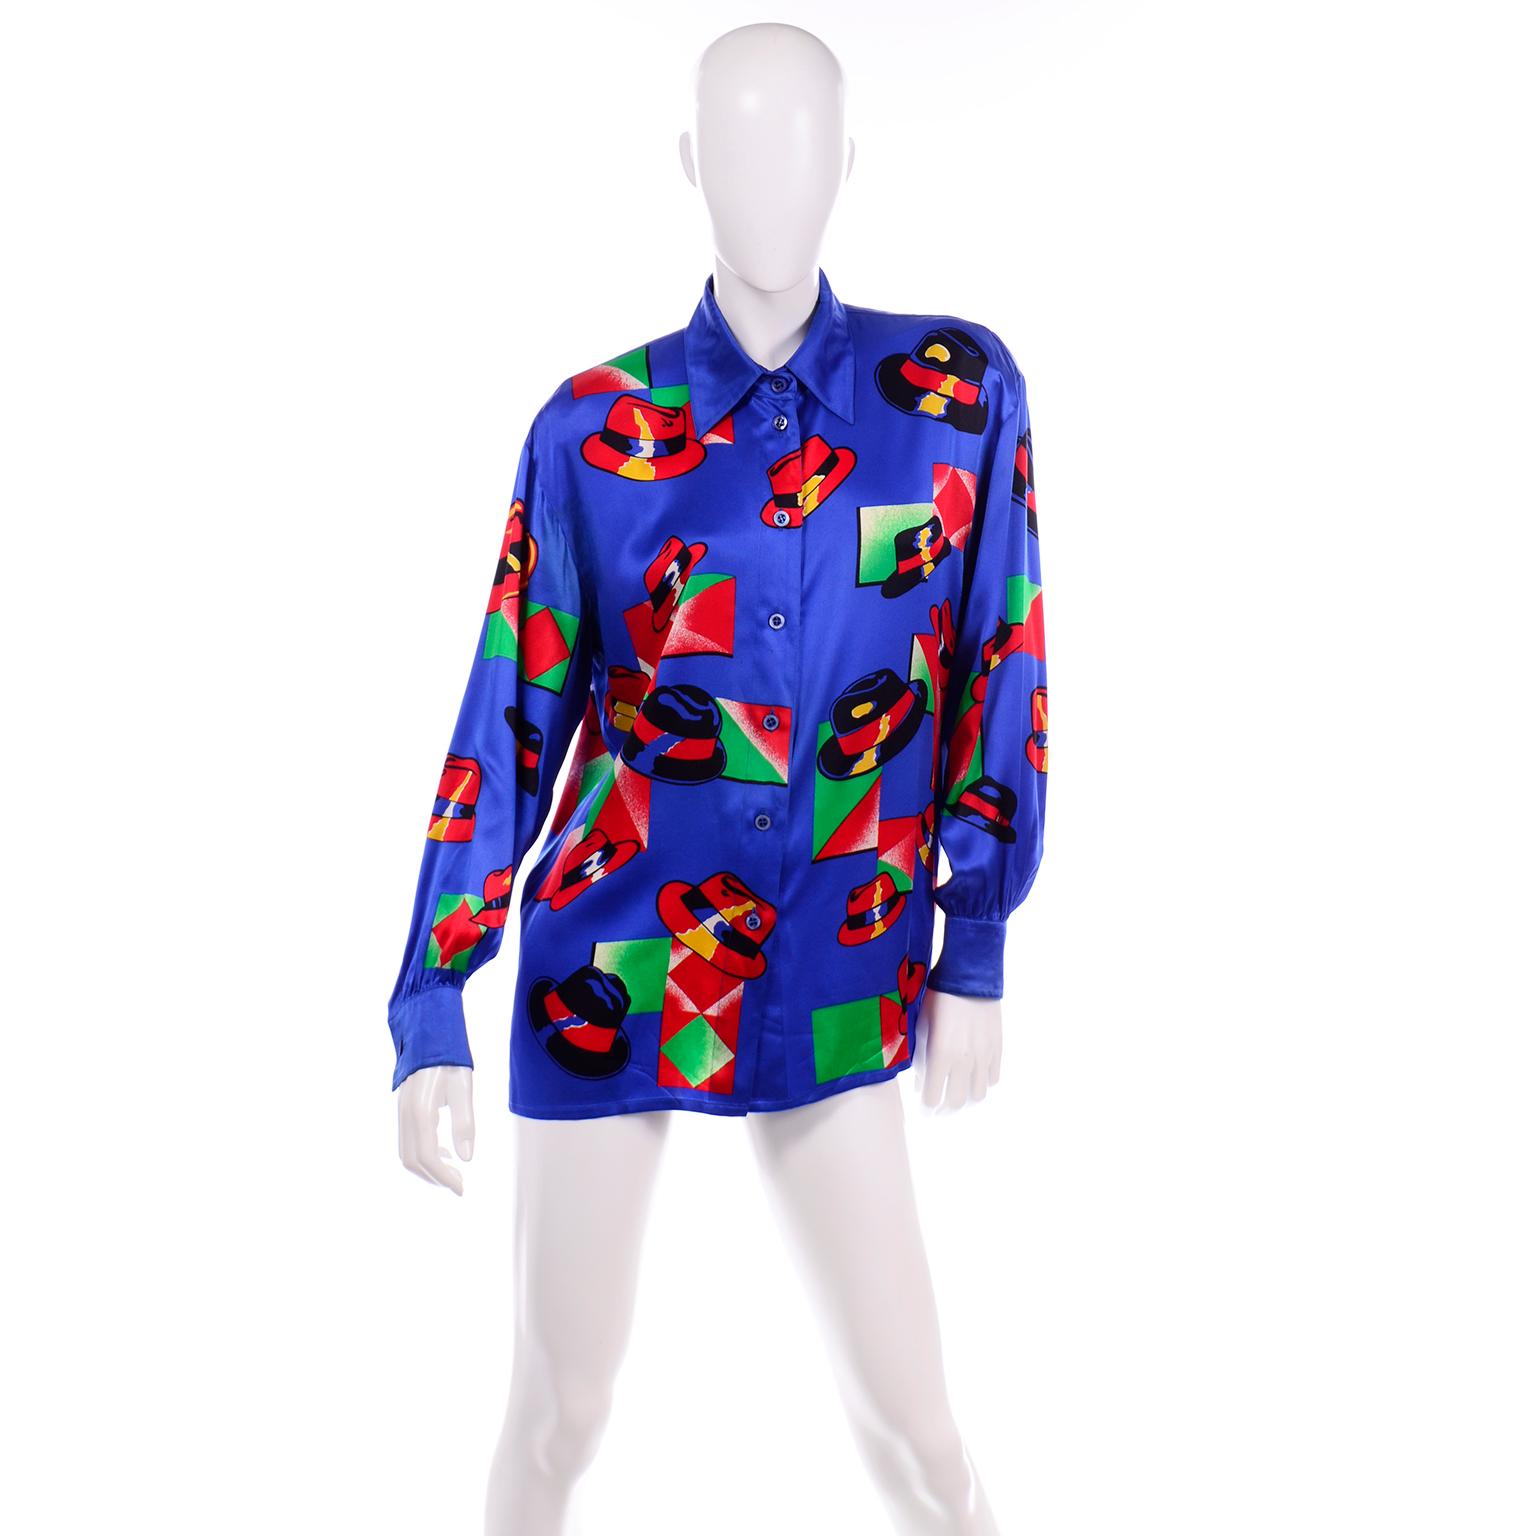 This is such a fun vintage Escada by Margaretha Ley silk blouse in blue with a great black and red fedora hat print with abstract gradient squares of green and red. The style resembles the bold illustrations in a comic book. This blouse buttons down